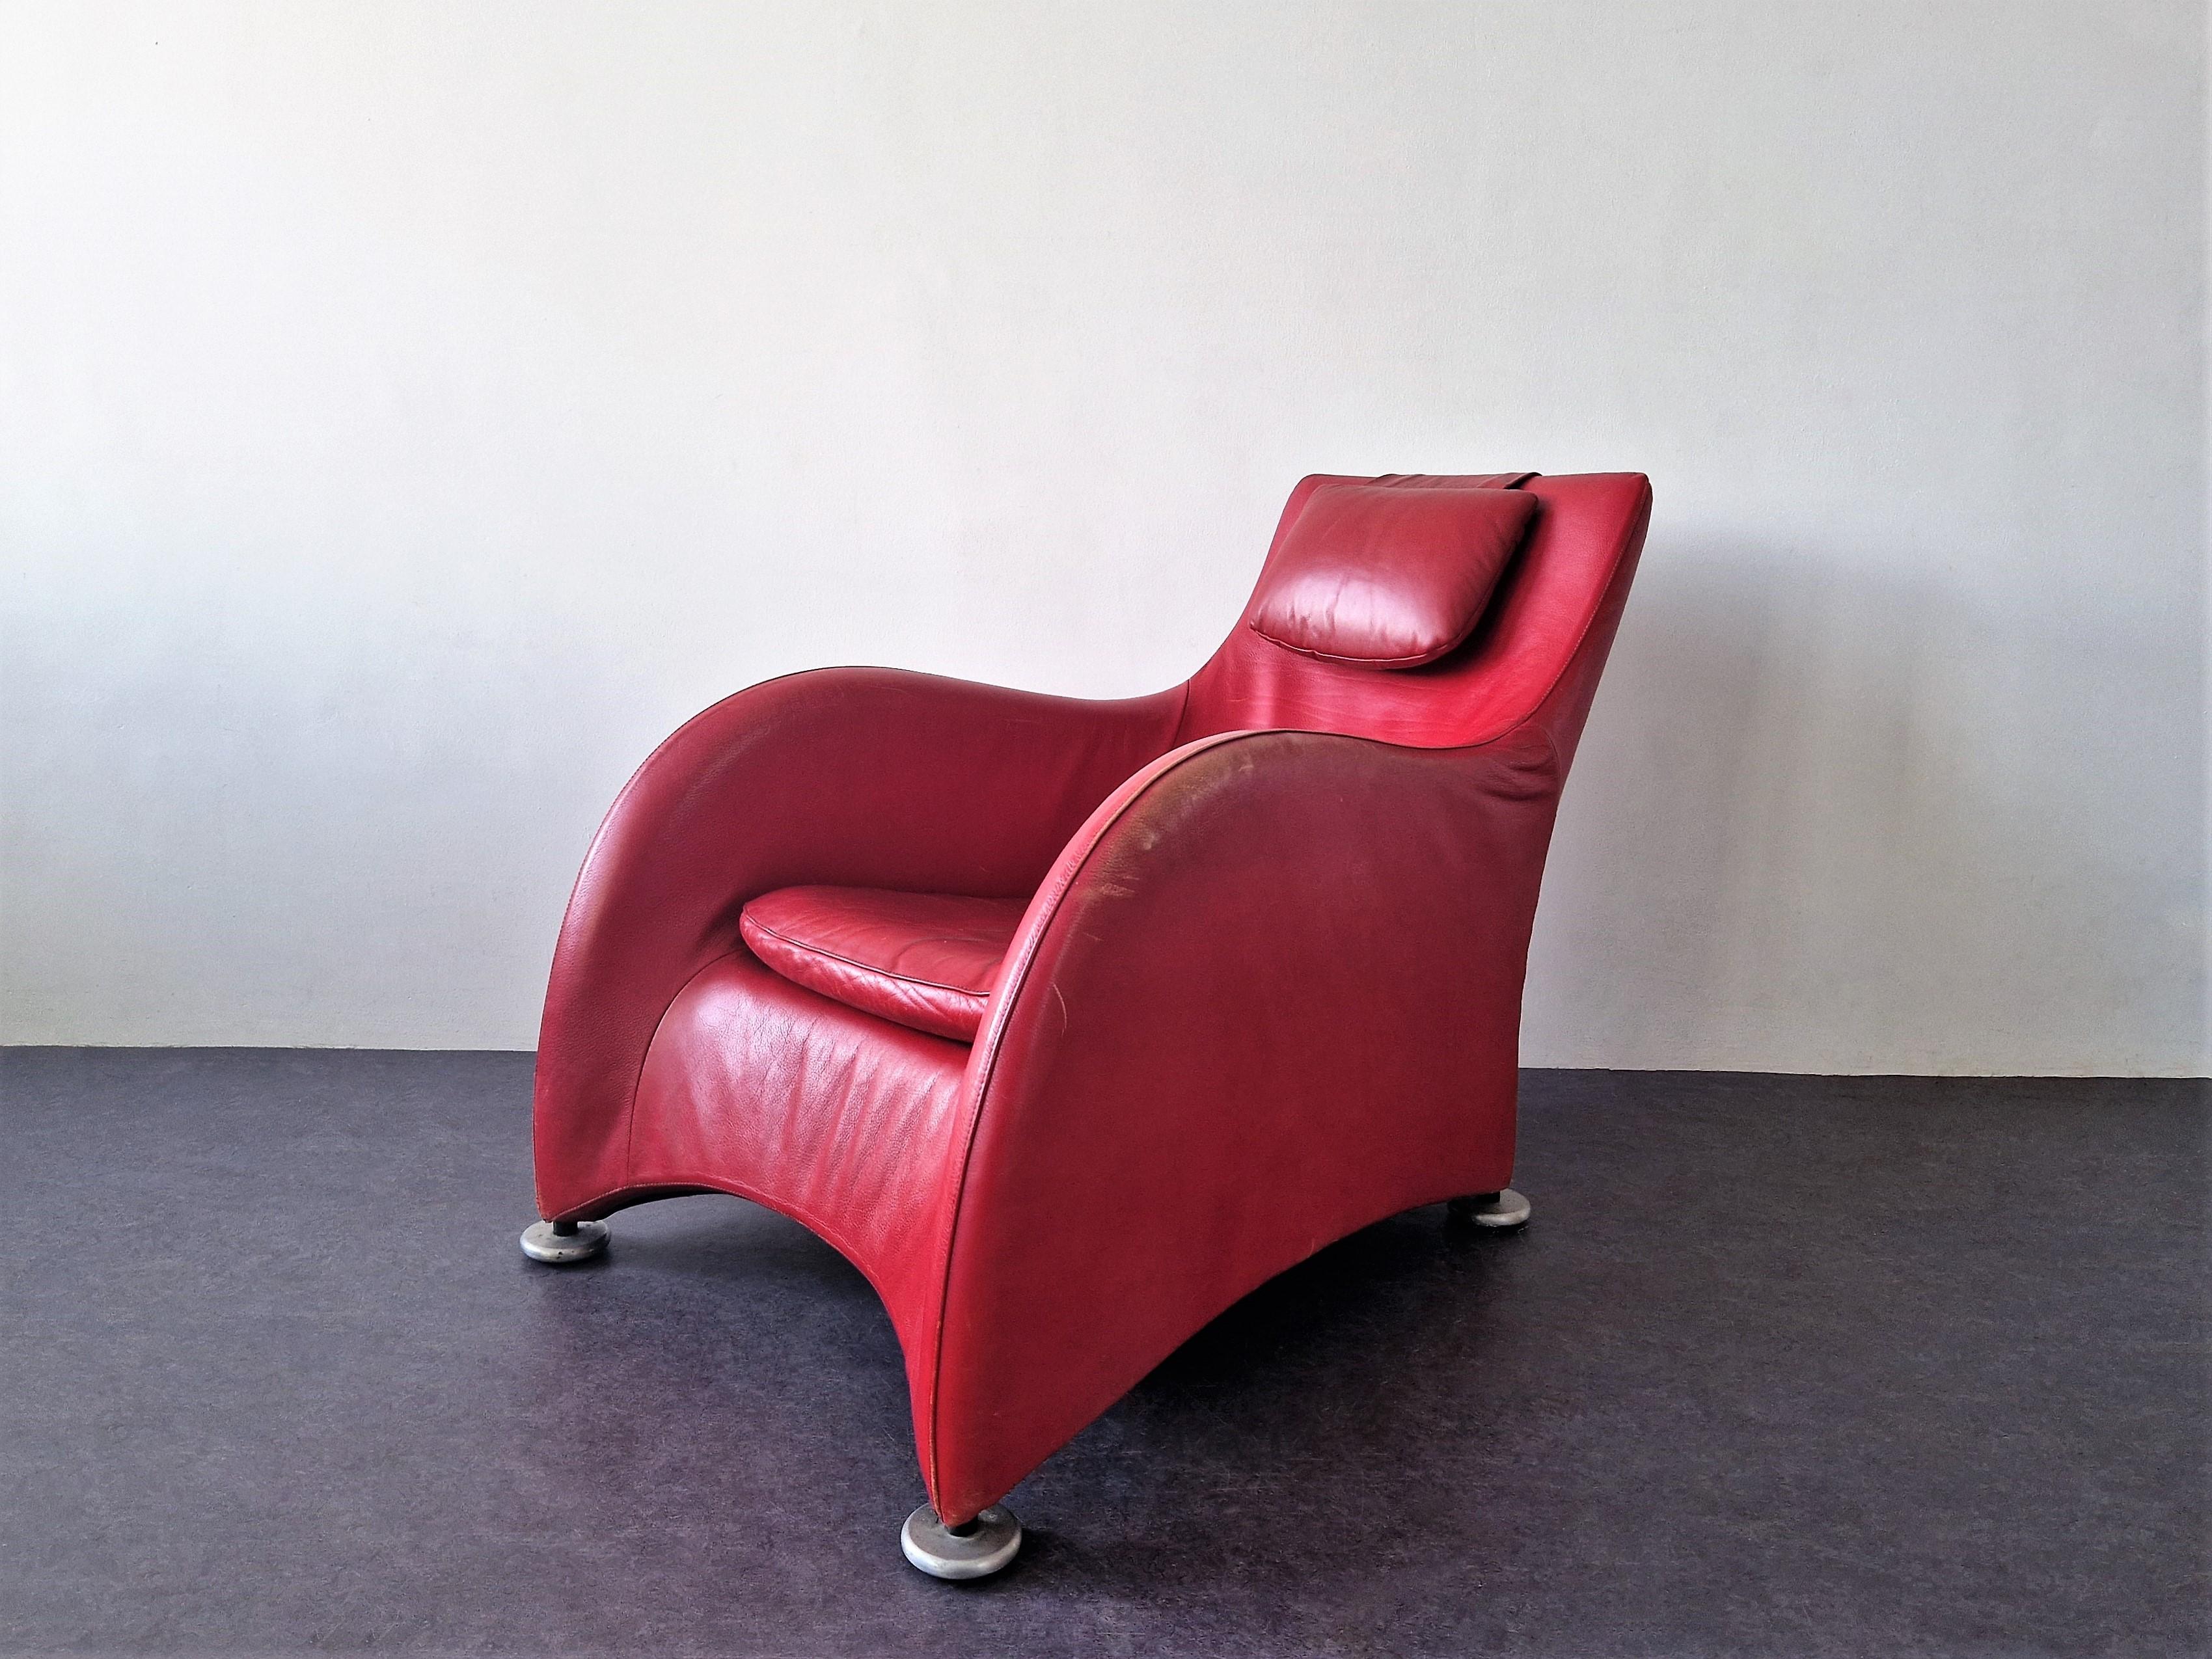 This 'Loge' lounge chair was designed by Gerard van den Berg for Montis in 1989. A beautiful chair with red leather upholstery and metal legs and this piece comes with an additional head/back cushion, that is hung over the back rest. The chair is a